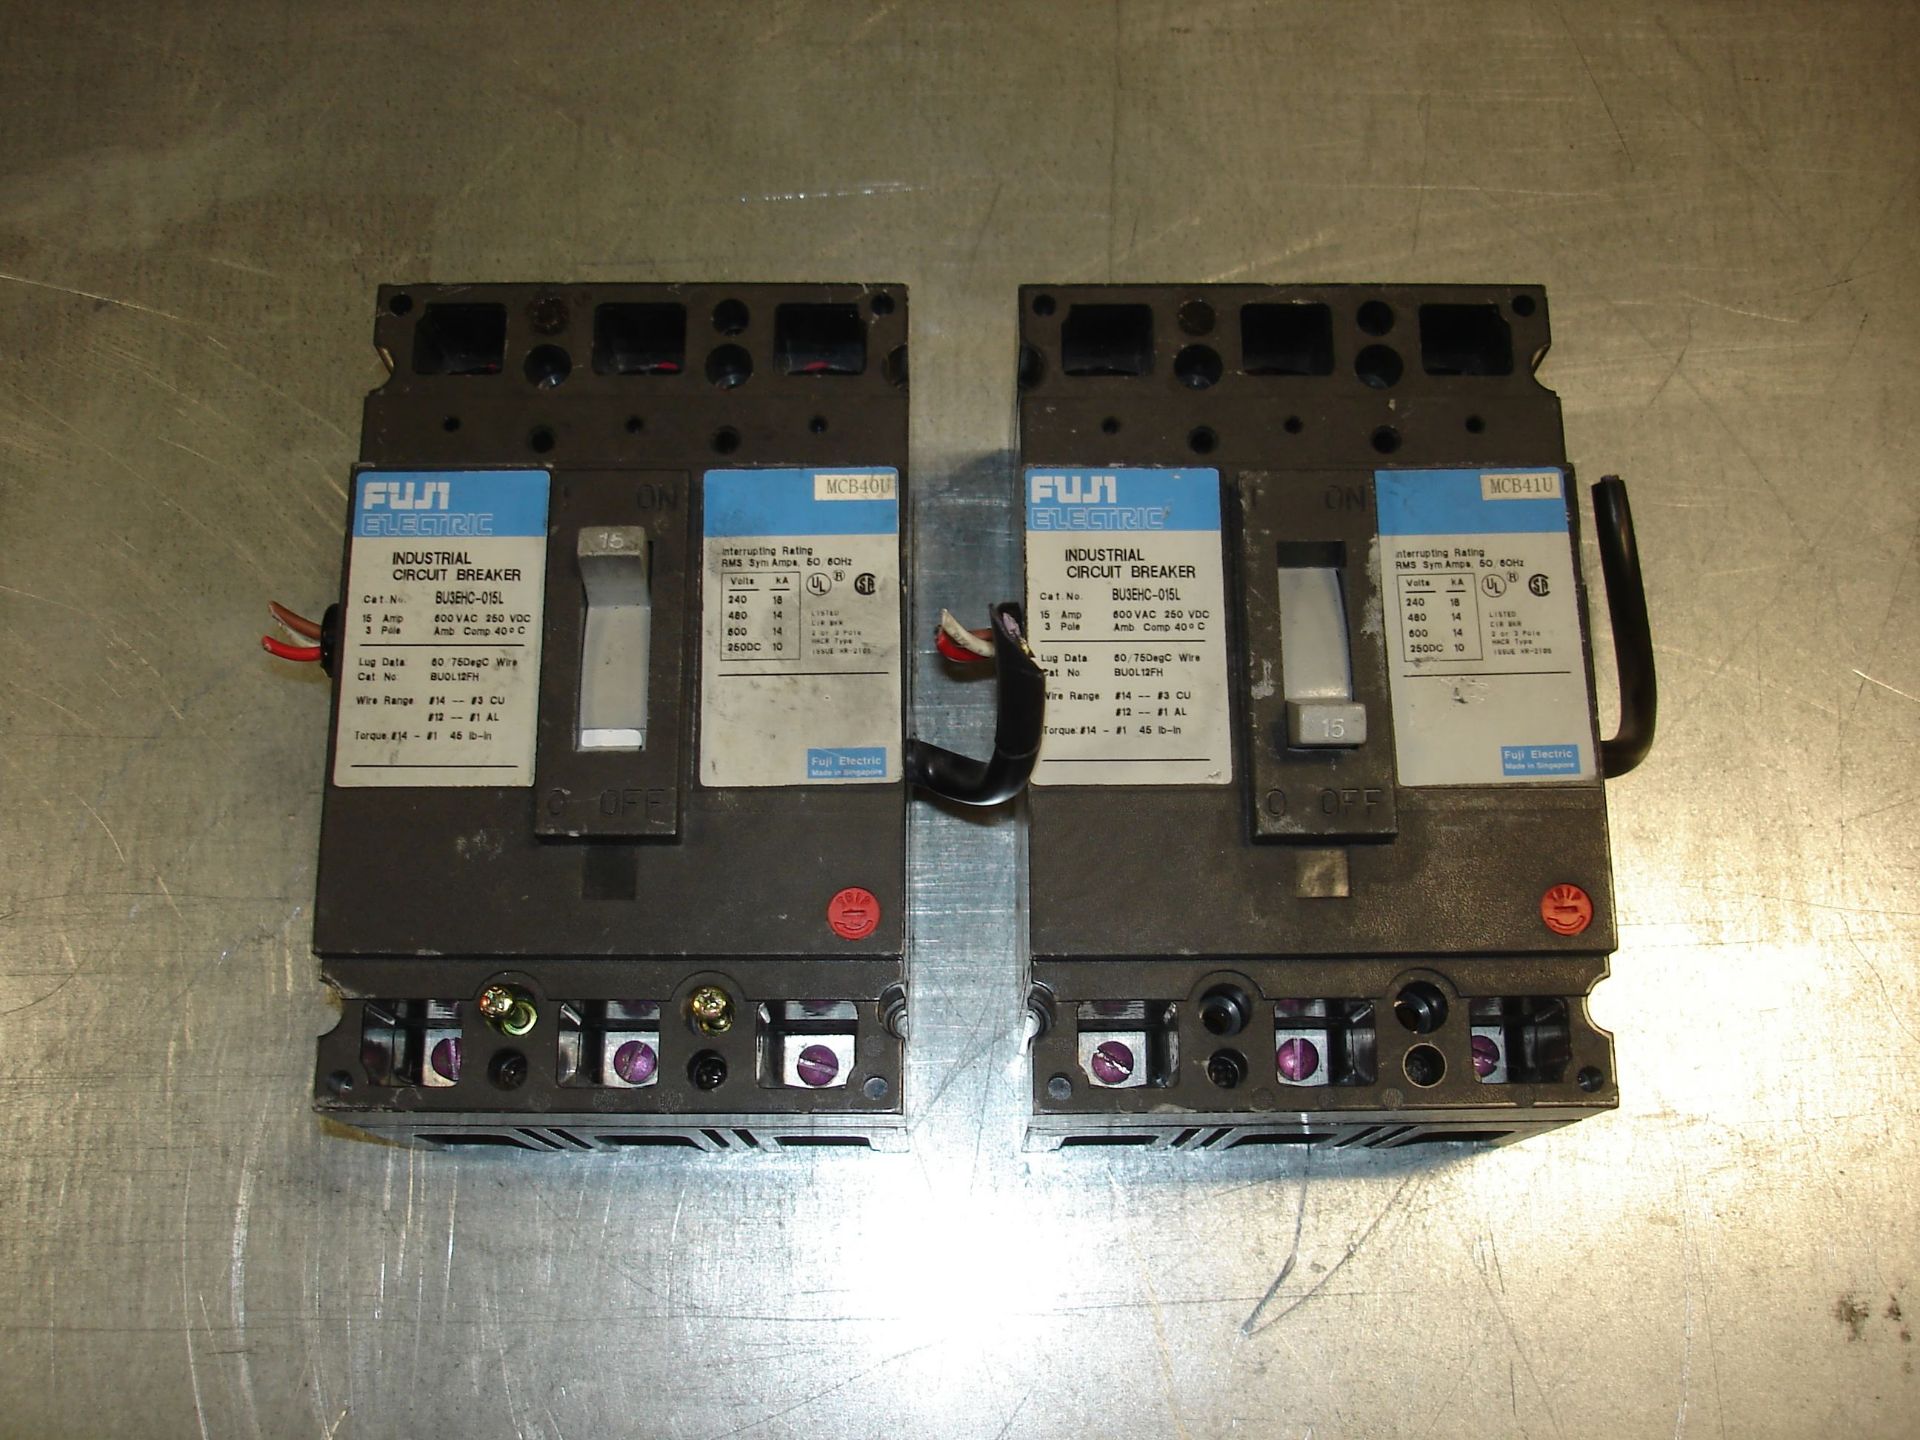 (2) BU3EHC-015L FUJI ELECTRIC INDUSTRIAL CIRCUIT BREAKER USED Pickup your lot(s) for free!